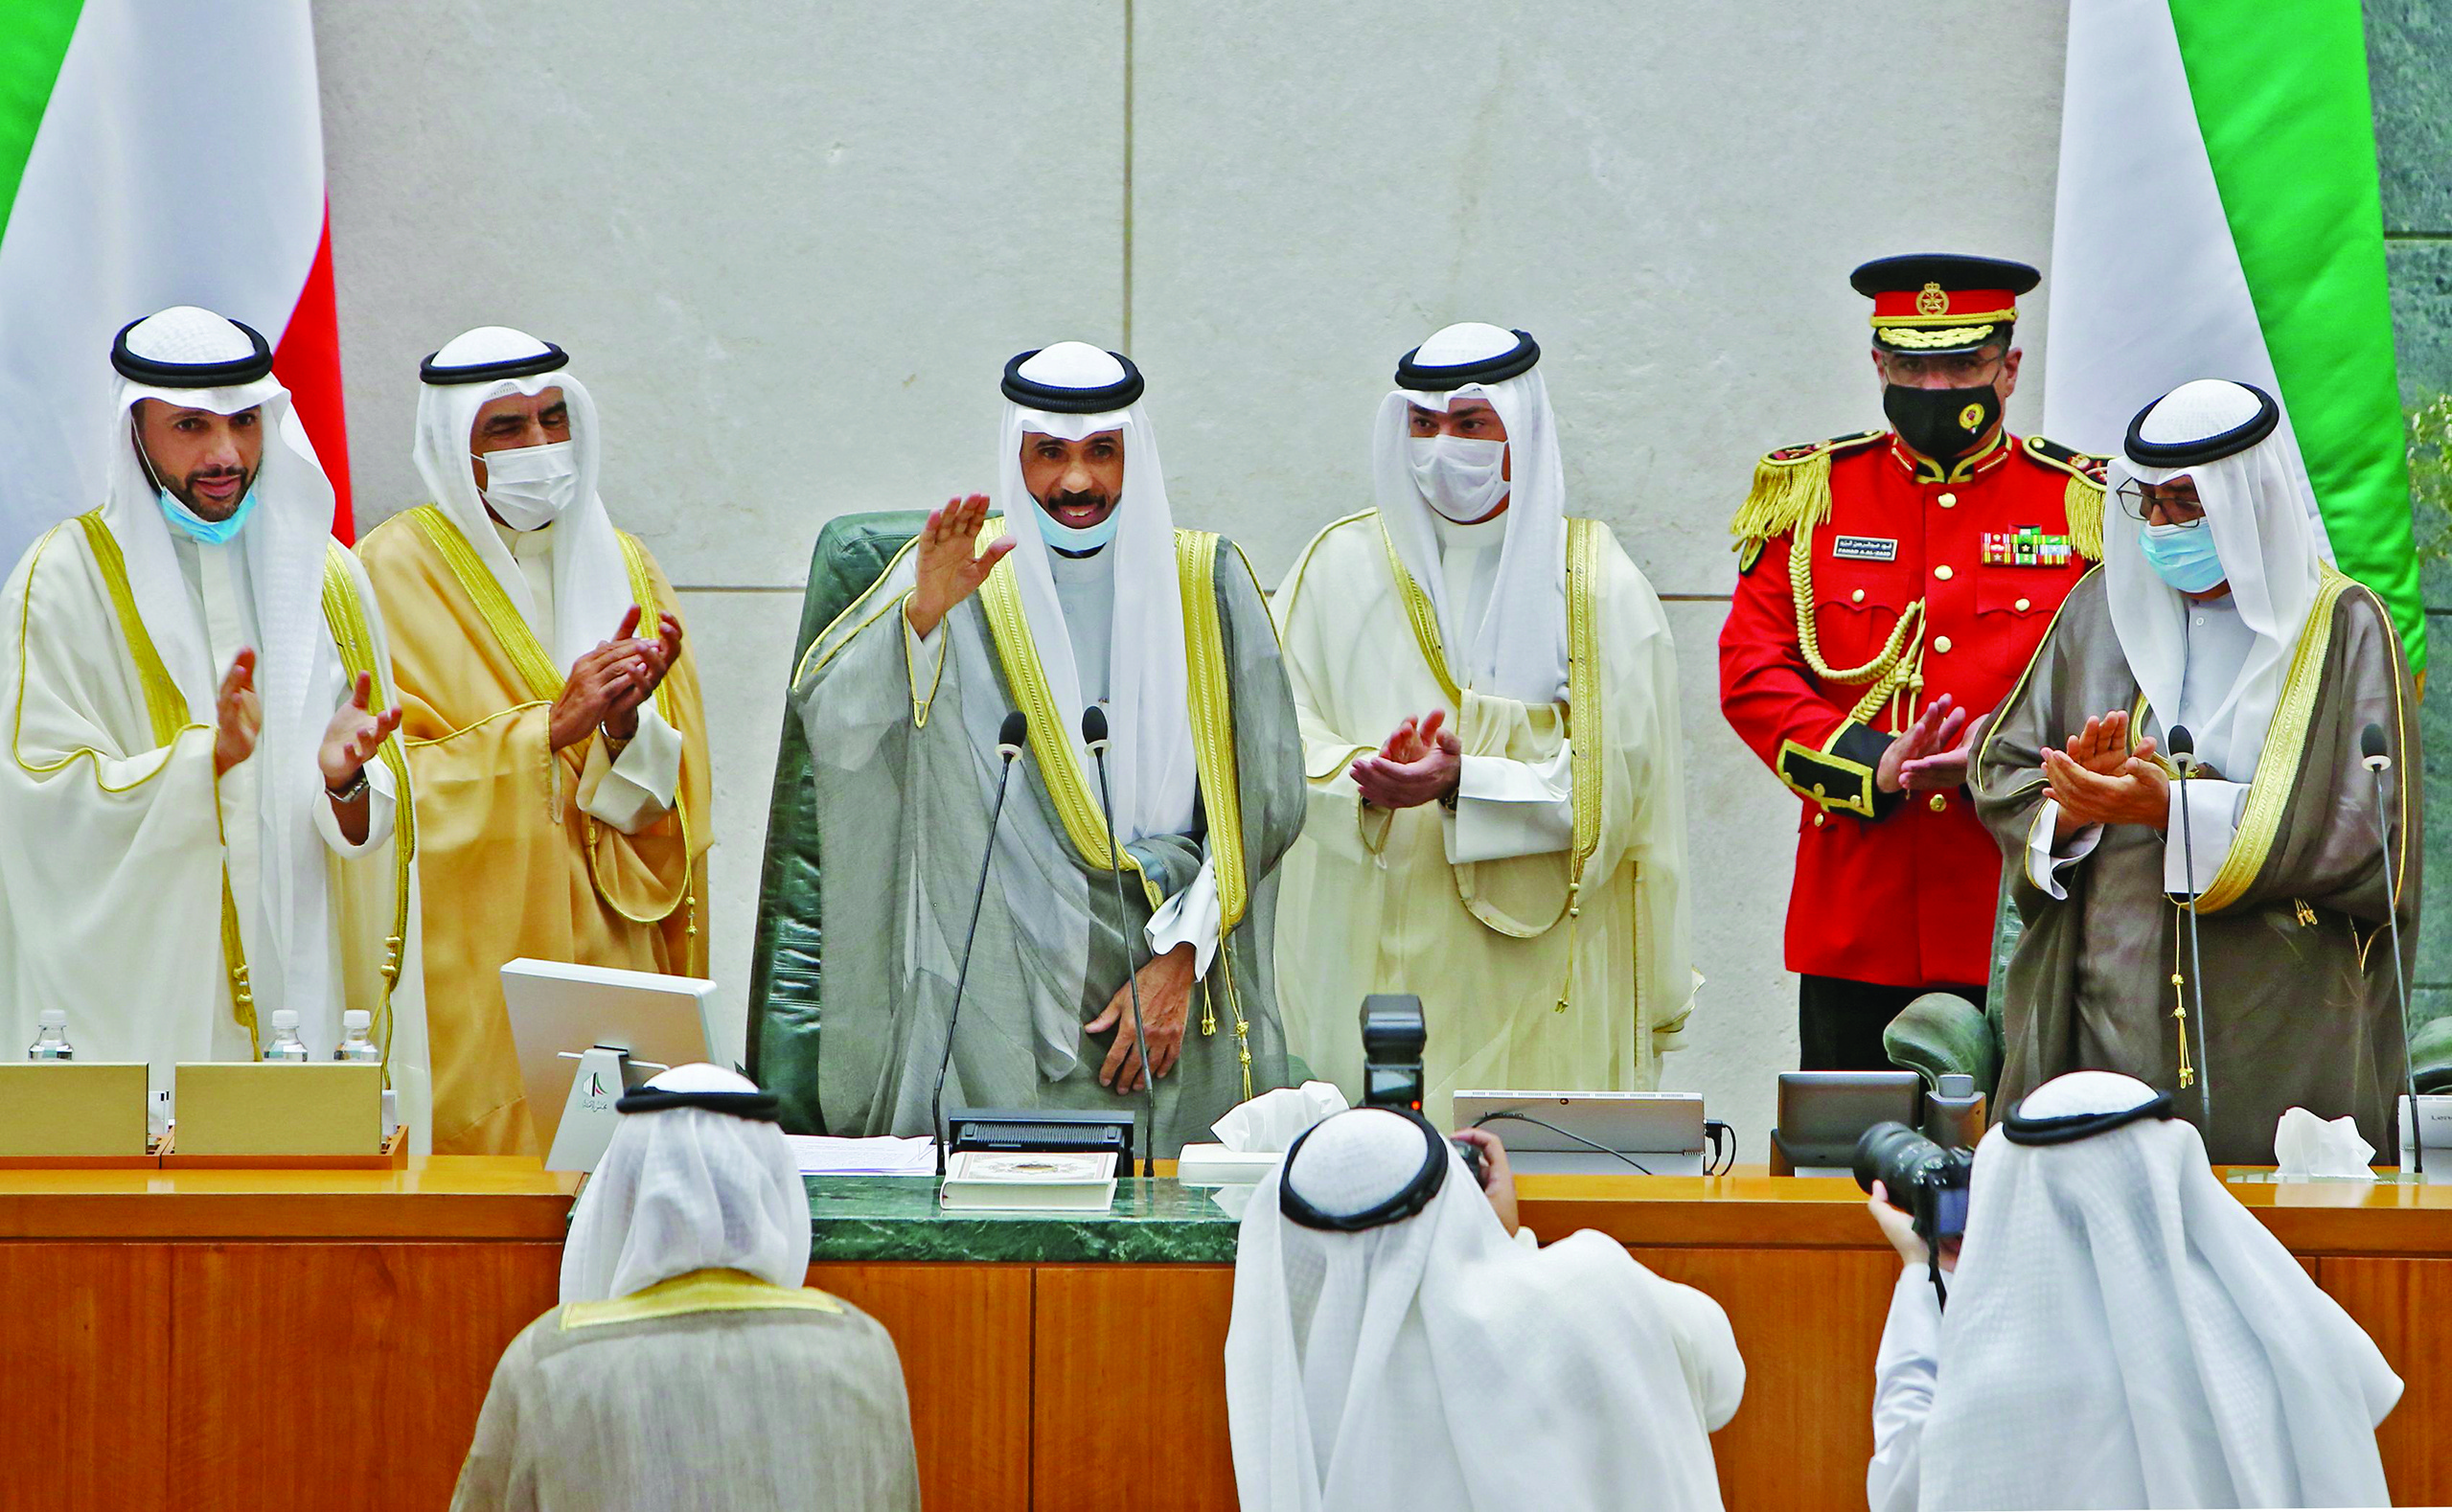 Emir of Kuwait Sheikh Nawaf al-Ahmad al-Jaber al-Sabah (C) gestures in greeting as he arrives with Crown Prince Sheikh Meshal al-Ahmad al-Jaber al-Sabah (R) and Parliament Speaker Marzouq al-Ghanim (L) to attend the opening of the 5th regular session at the country's National Assembly (parliament) in Kuwait City on October 20, 2020. (Photo by YASSER AL-ZAYYAT / AFP)